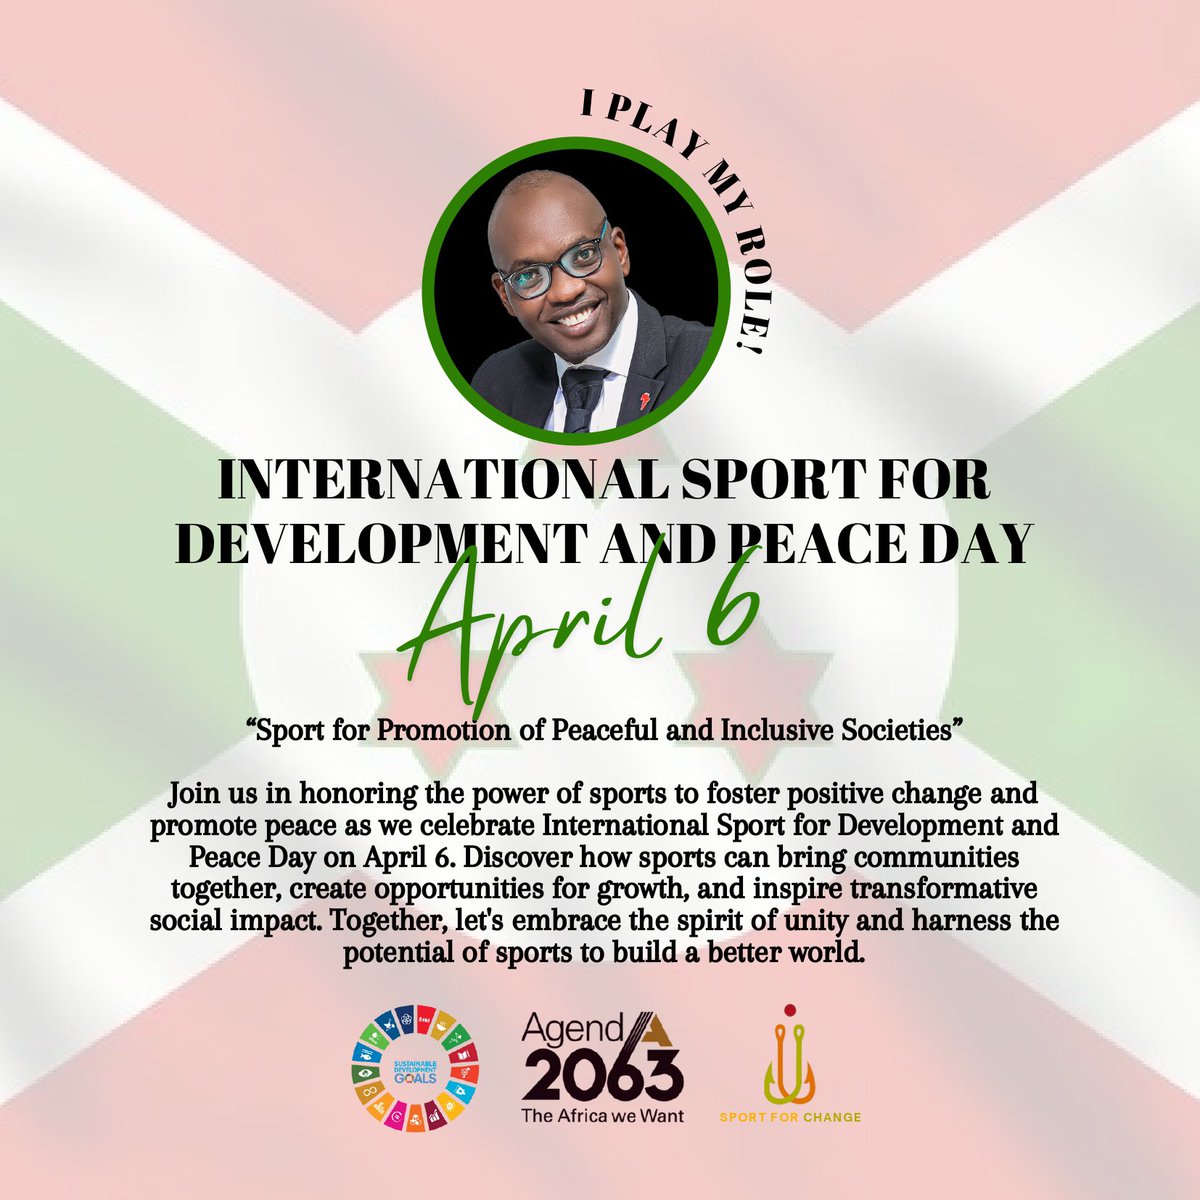 #IPlayMyRole: International Sport for Development and Peace Day, April 6. “Sport for promotion of peaceful and inclusive societies”. #Agenda2063 #SportForChange #SustainableDevelopmentGoals